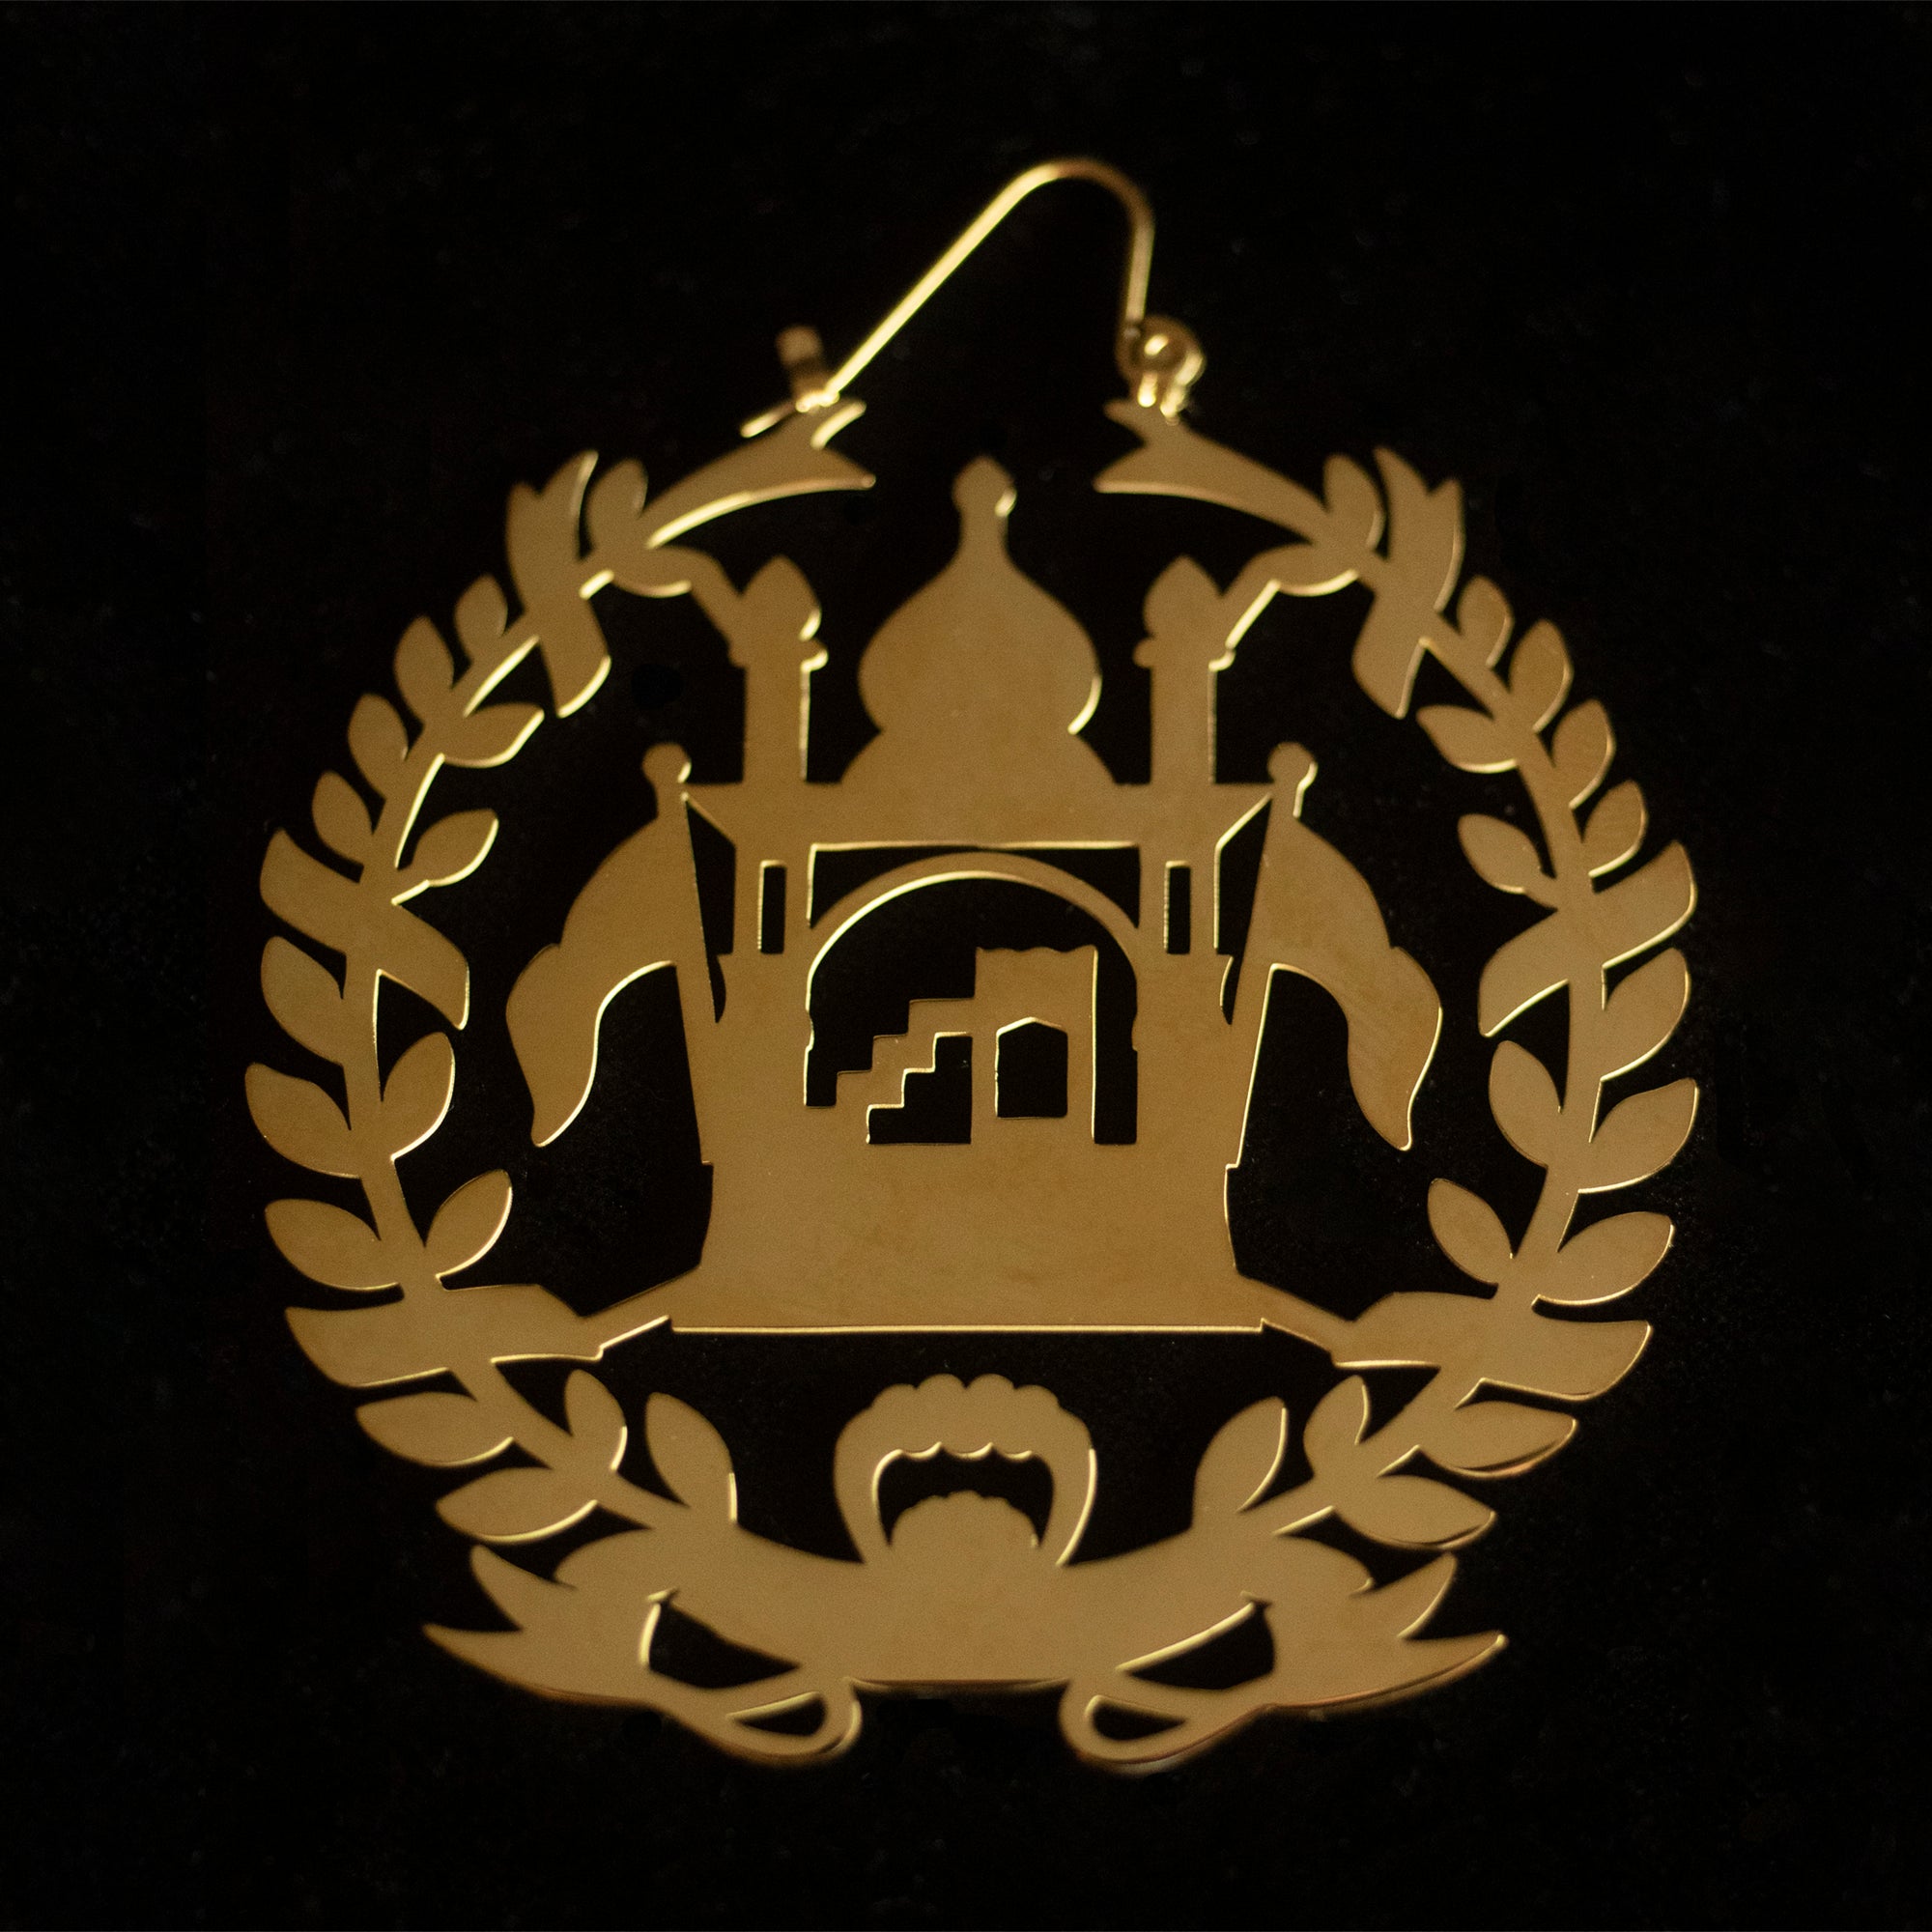 Earrings shaped as the mehrab of Afghanistan in gold against a black background.